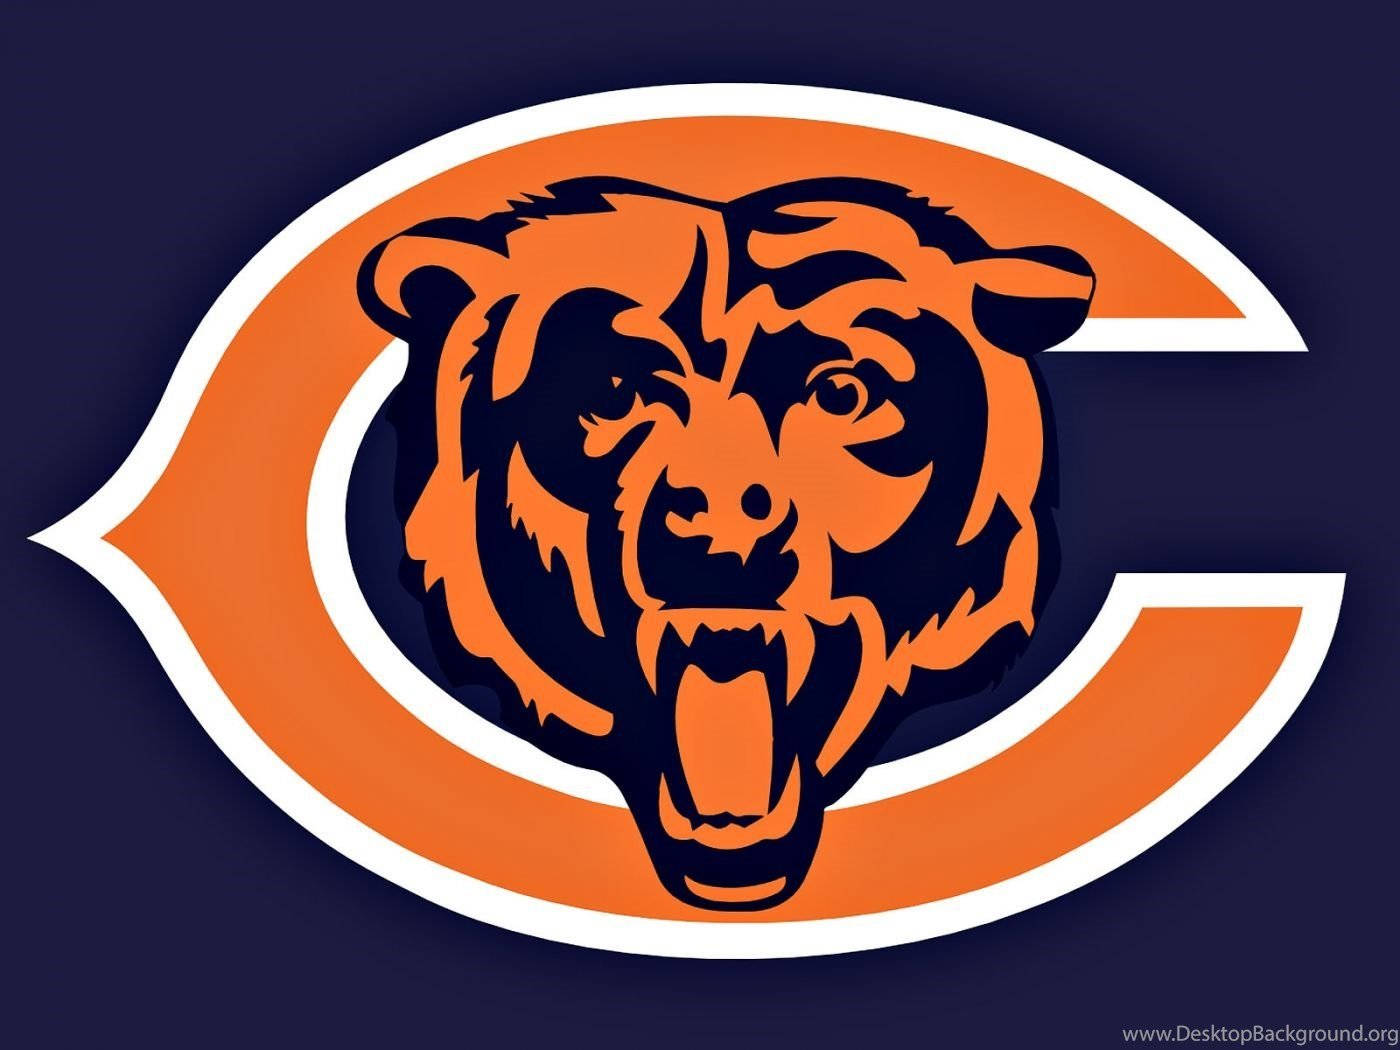 Chicago Bears wallpapers - NFL wallpapers Wallpaper